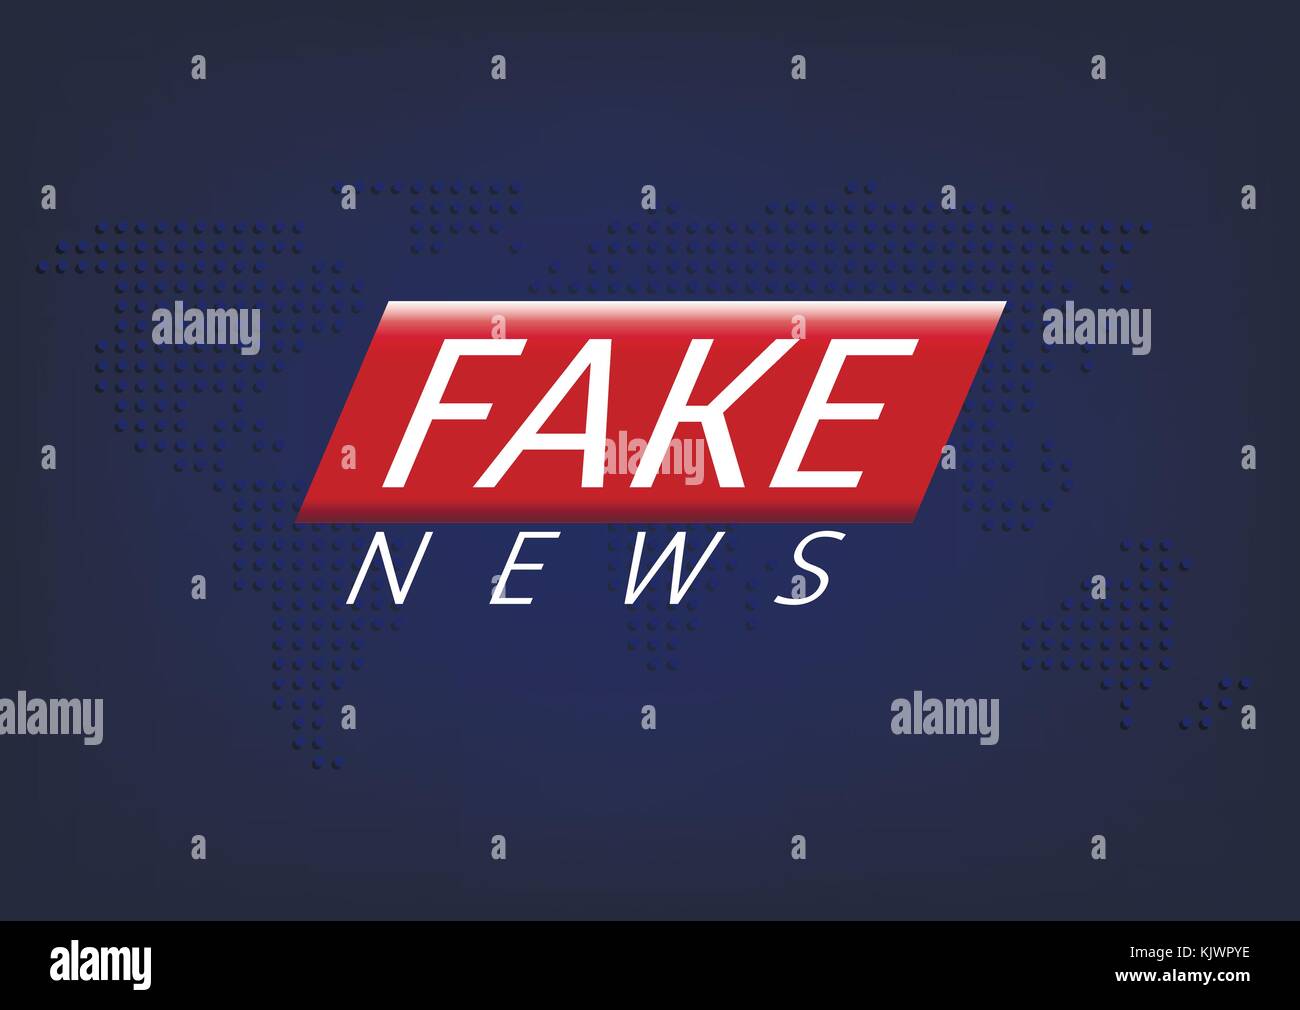 Fake news Stock Vector Images - Alamy